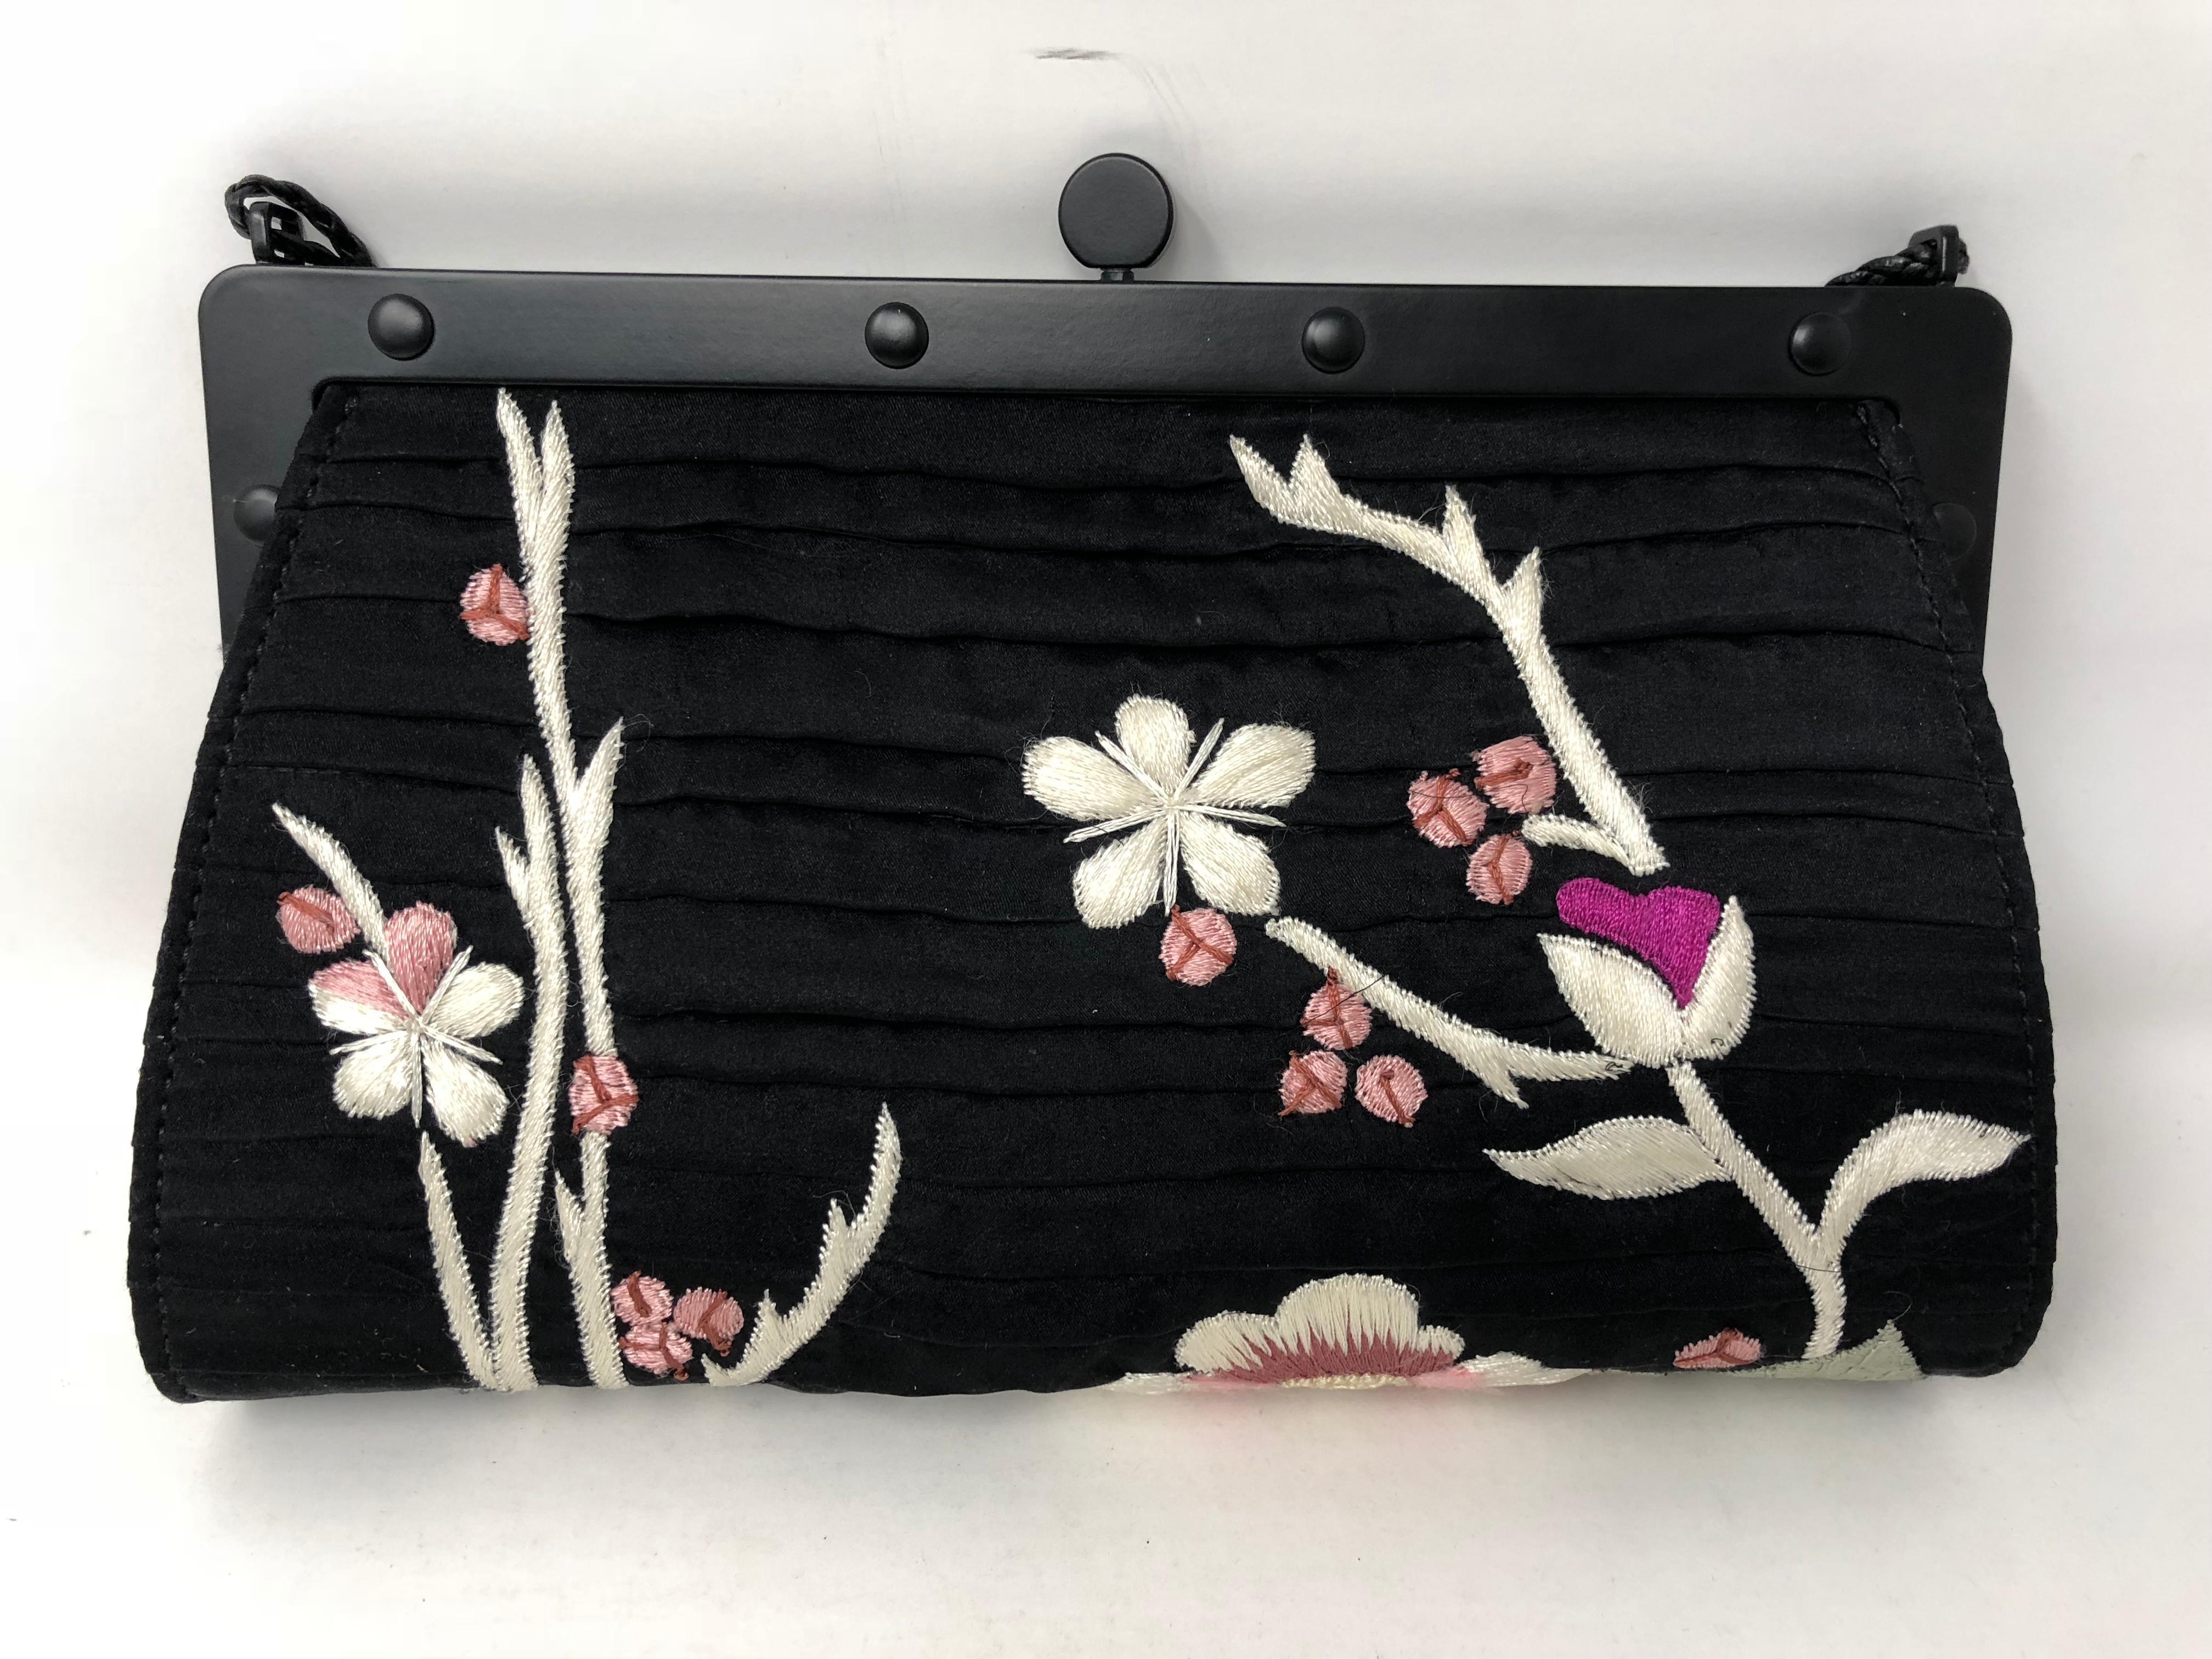 Gucci embroidered Evening Bag 1